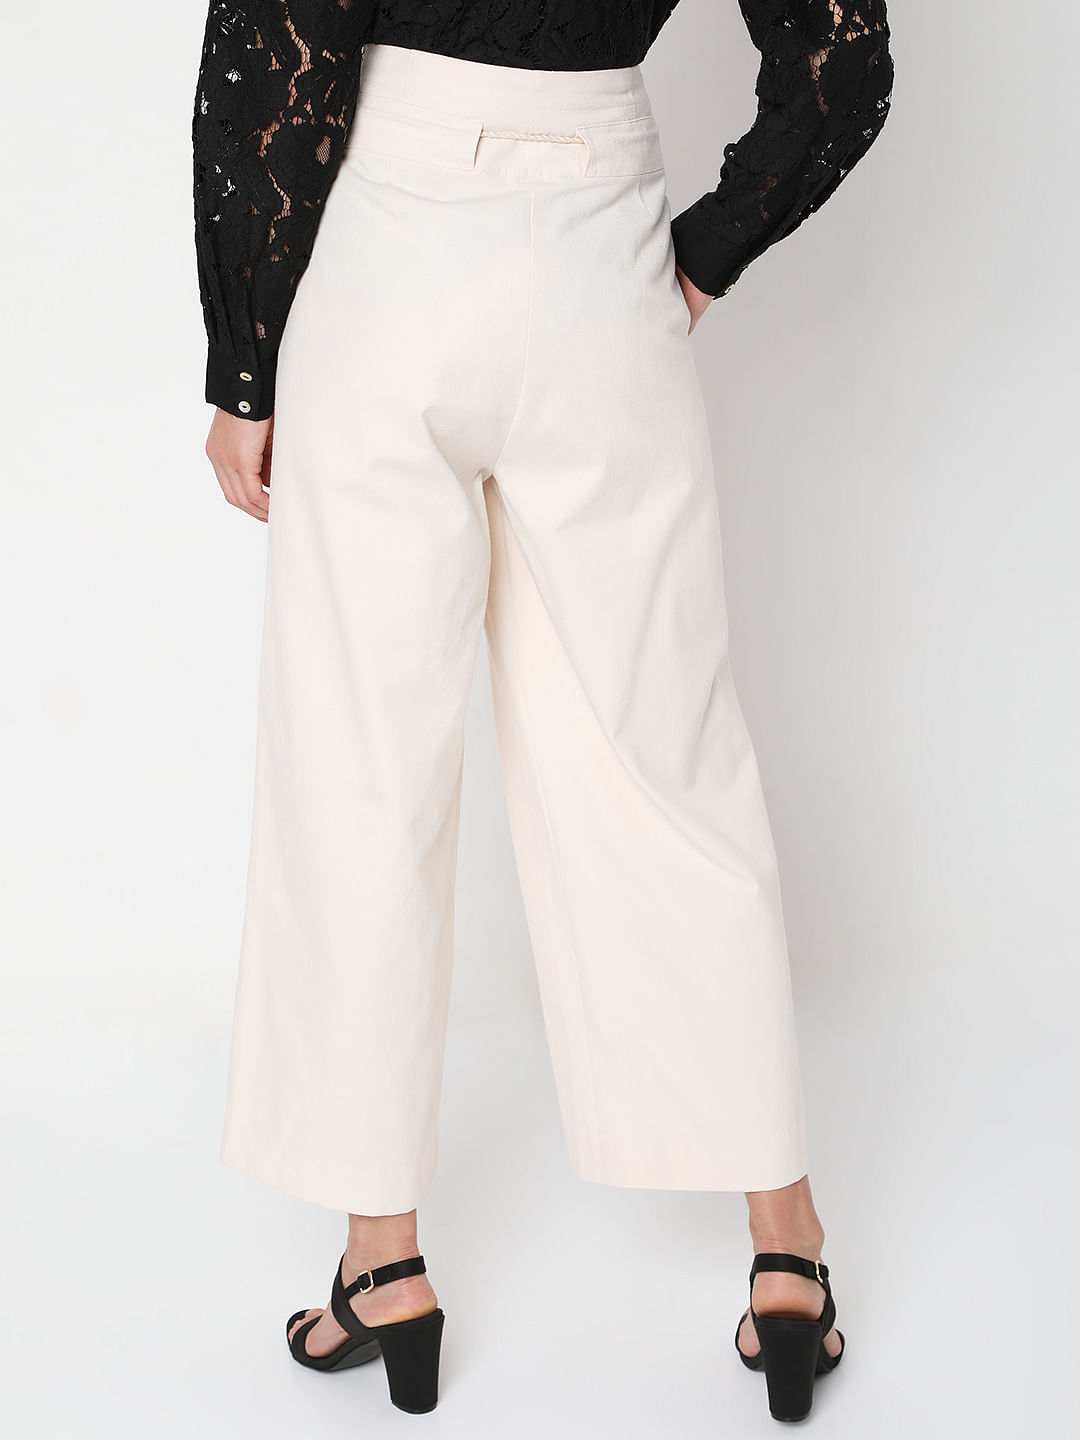 Buy Cord Beige Cotton Twill Highwaist Pleated Pant Online  Aza Fashions